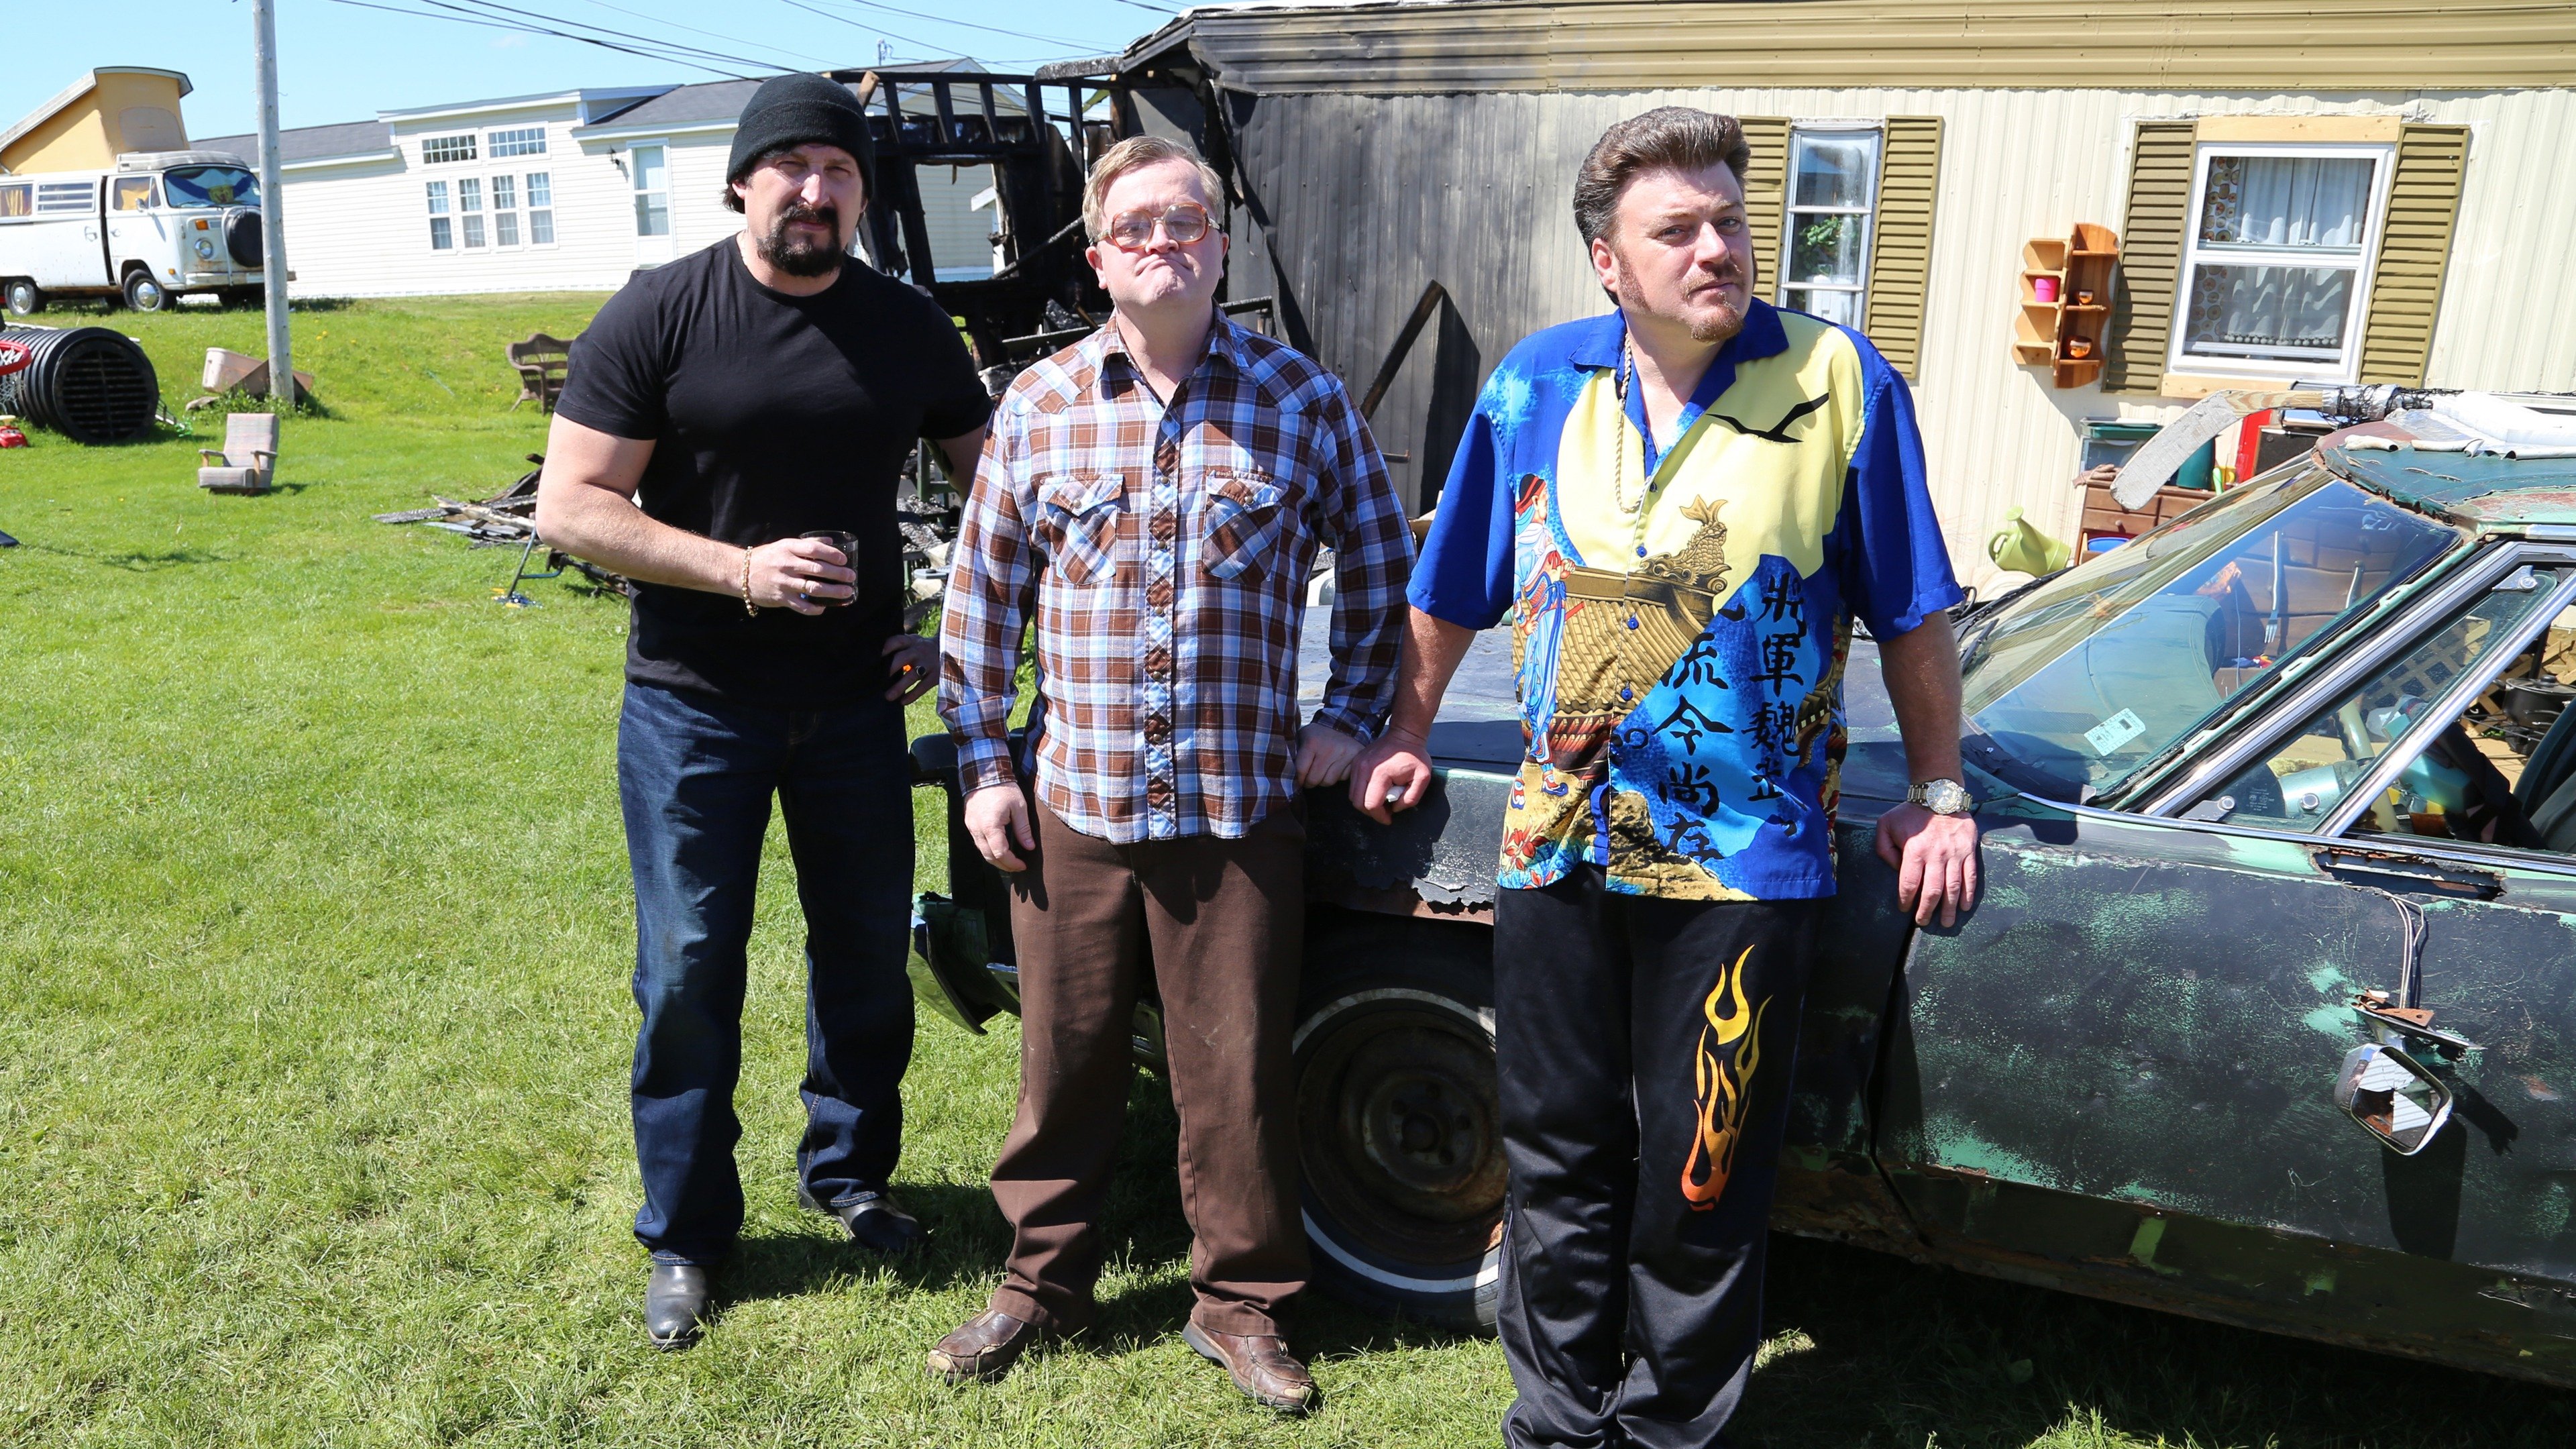 Trailer Park Boys |32 Cartel Shows on Netflix That Are Worth Watching